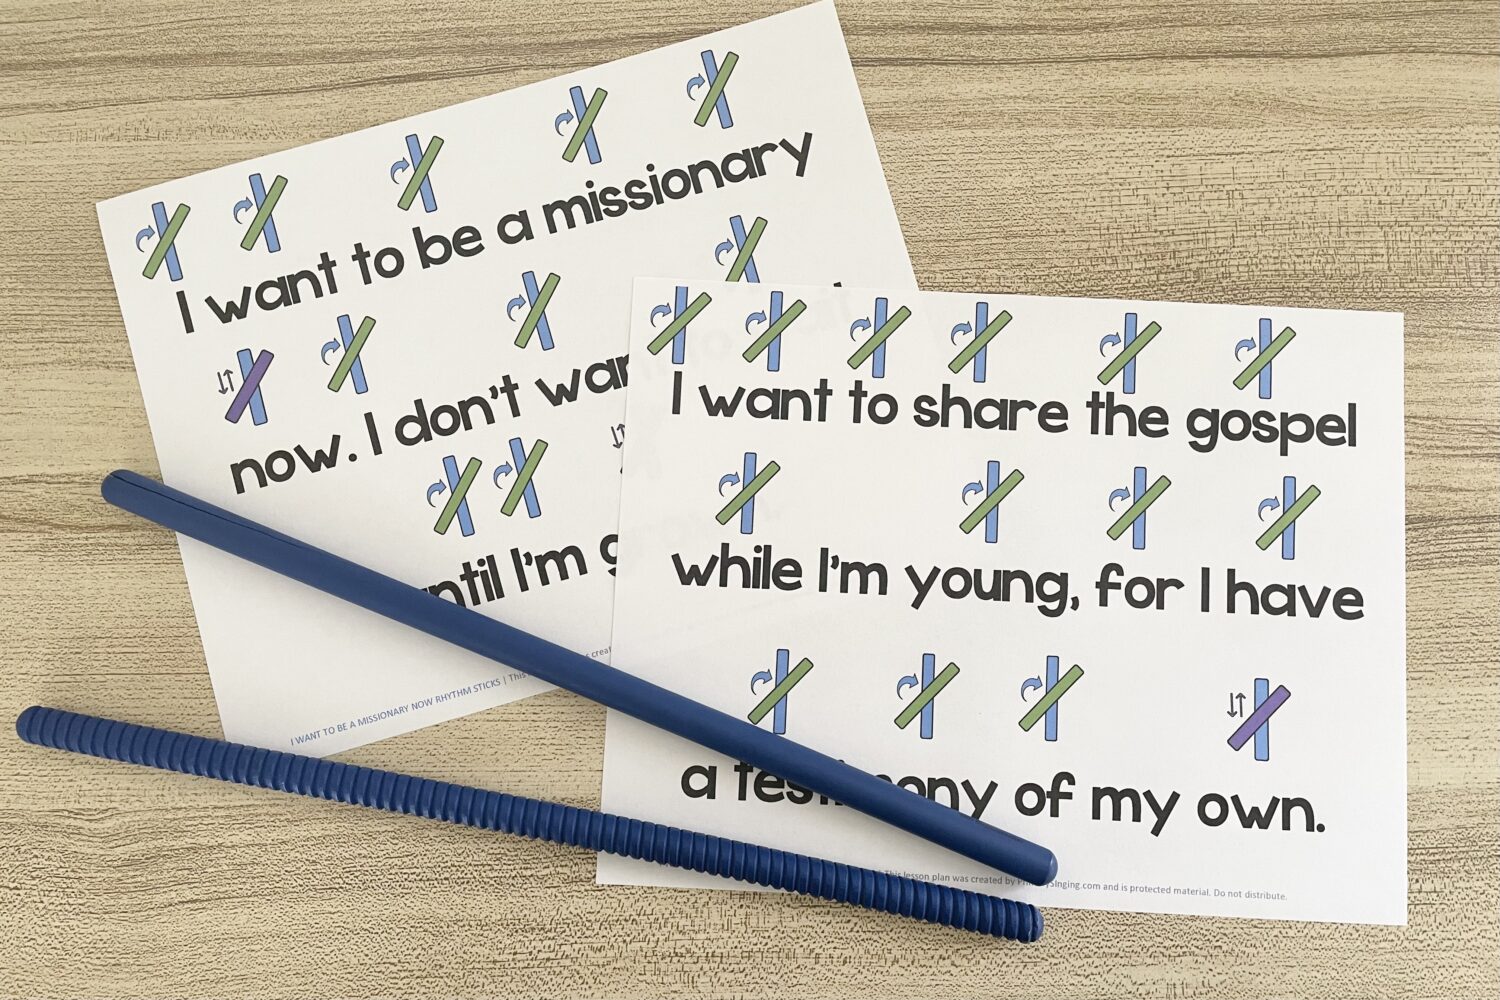 I Want to Be a Missionary Now Rhythm Sticks - Use this fun rhythm sticks pattern and tap along with the beat for a simple way to review this song with printable song helps for LDS Primary Music Leaders.